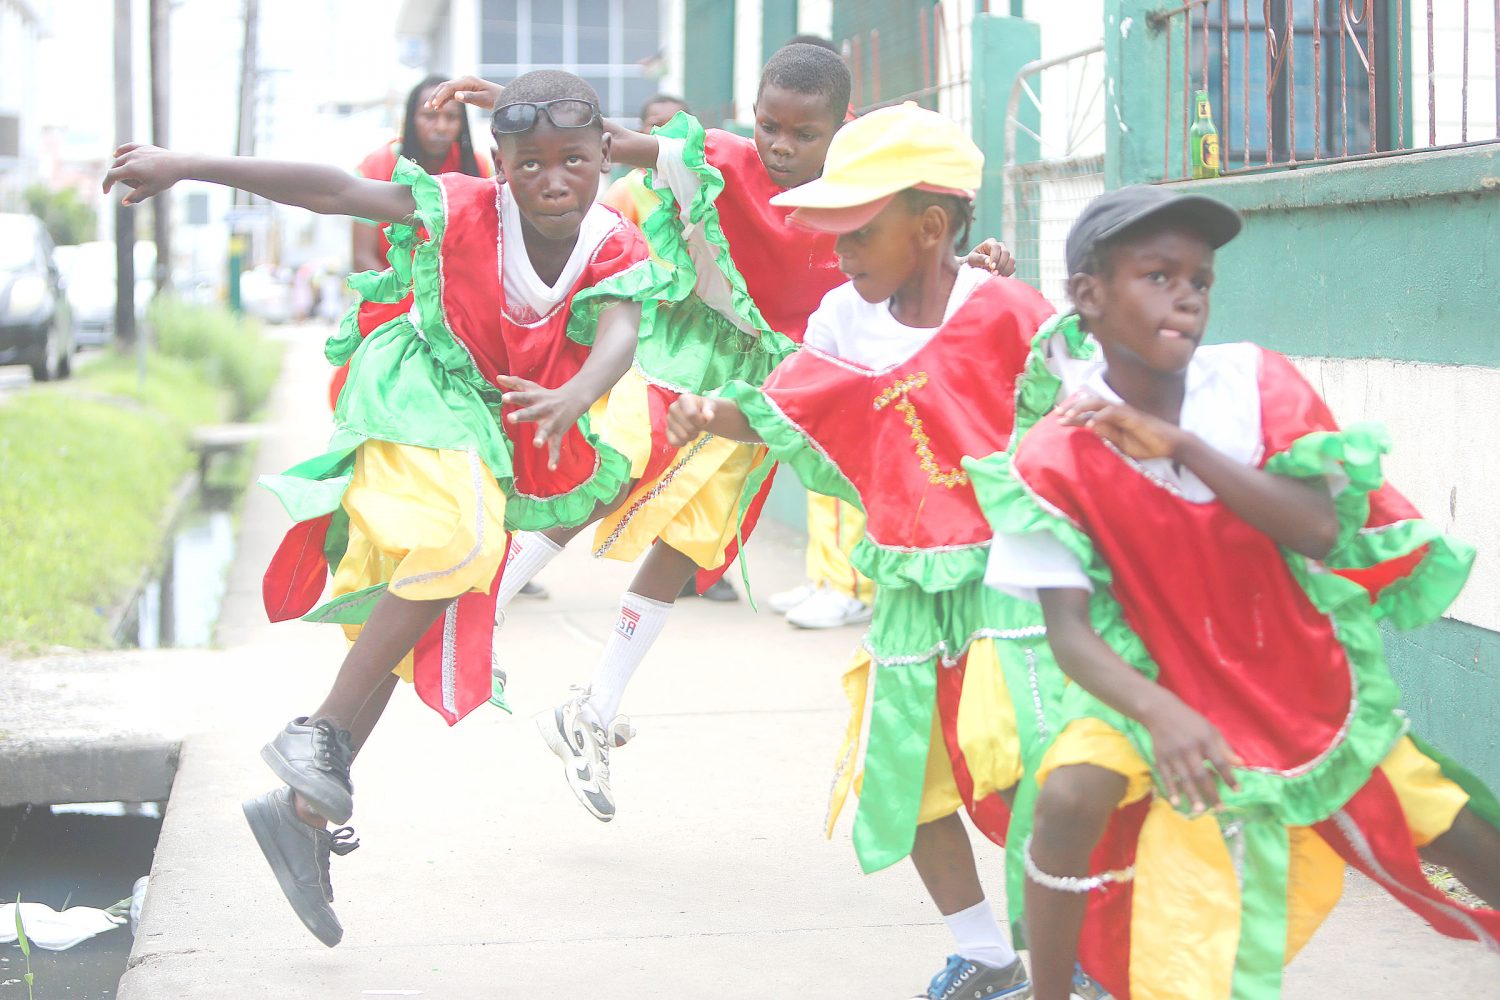 Many masquerade bands have once again taken to the streets for the Christmas season, keeping the tradition alive. In this Keno George photo, a troupe of young masqueraders show off their moves near the junction of Camp Street and North Road.